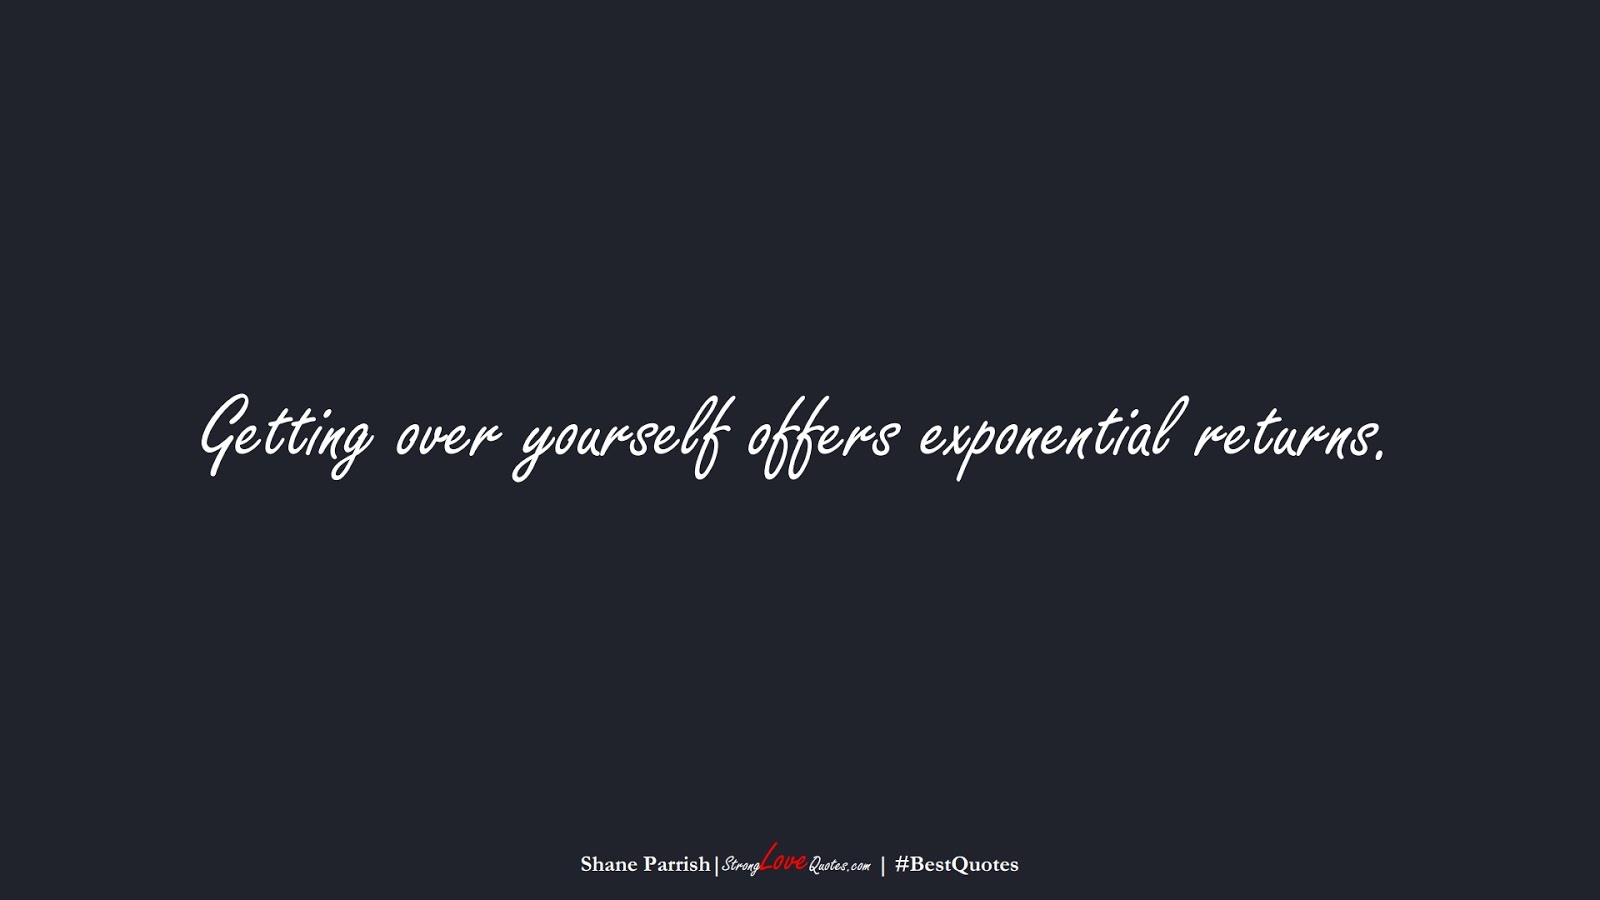 Getting over yourself offers exponential returns. (Shane Parrish);  #BestQuotes